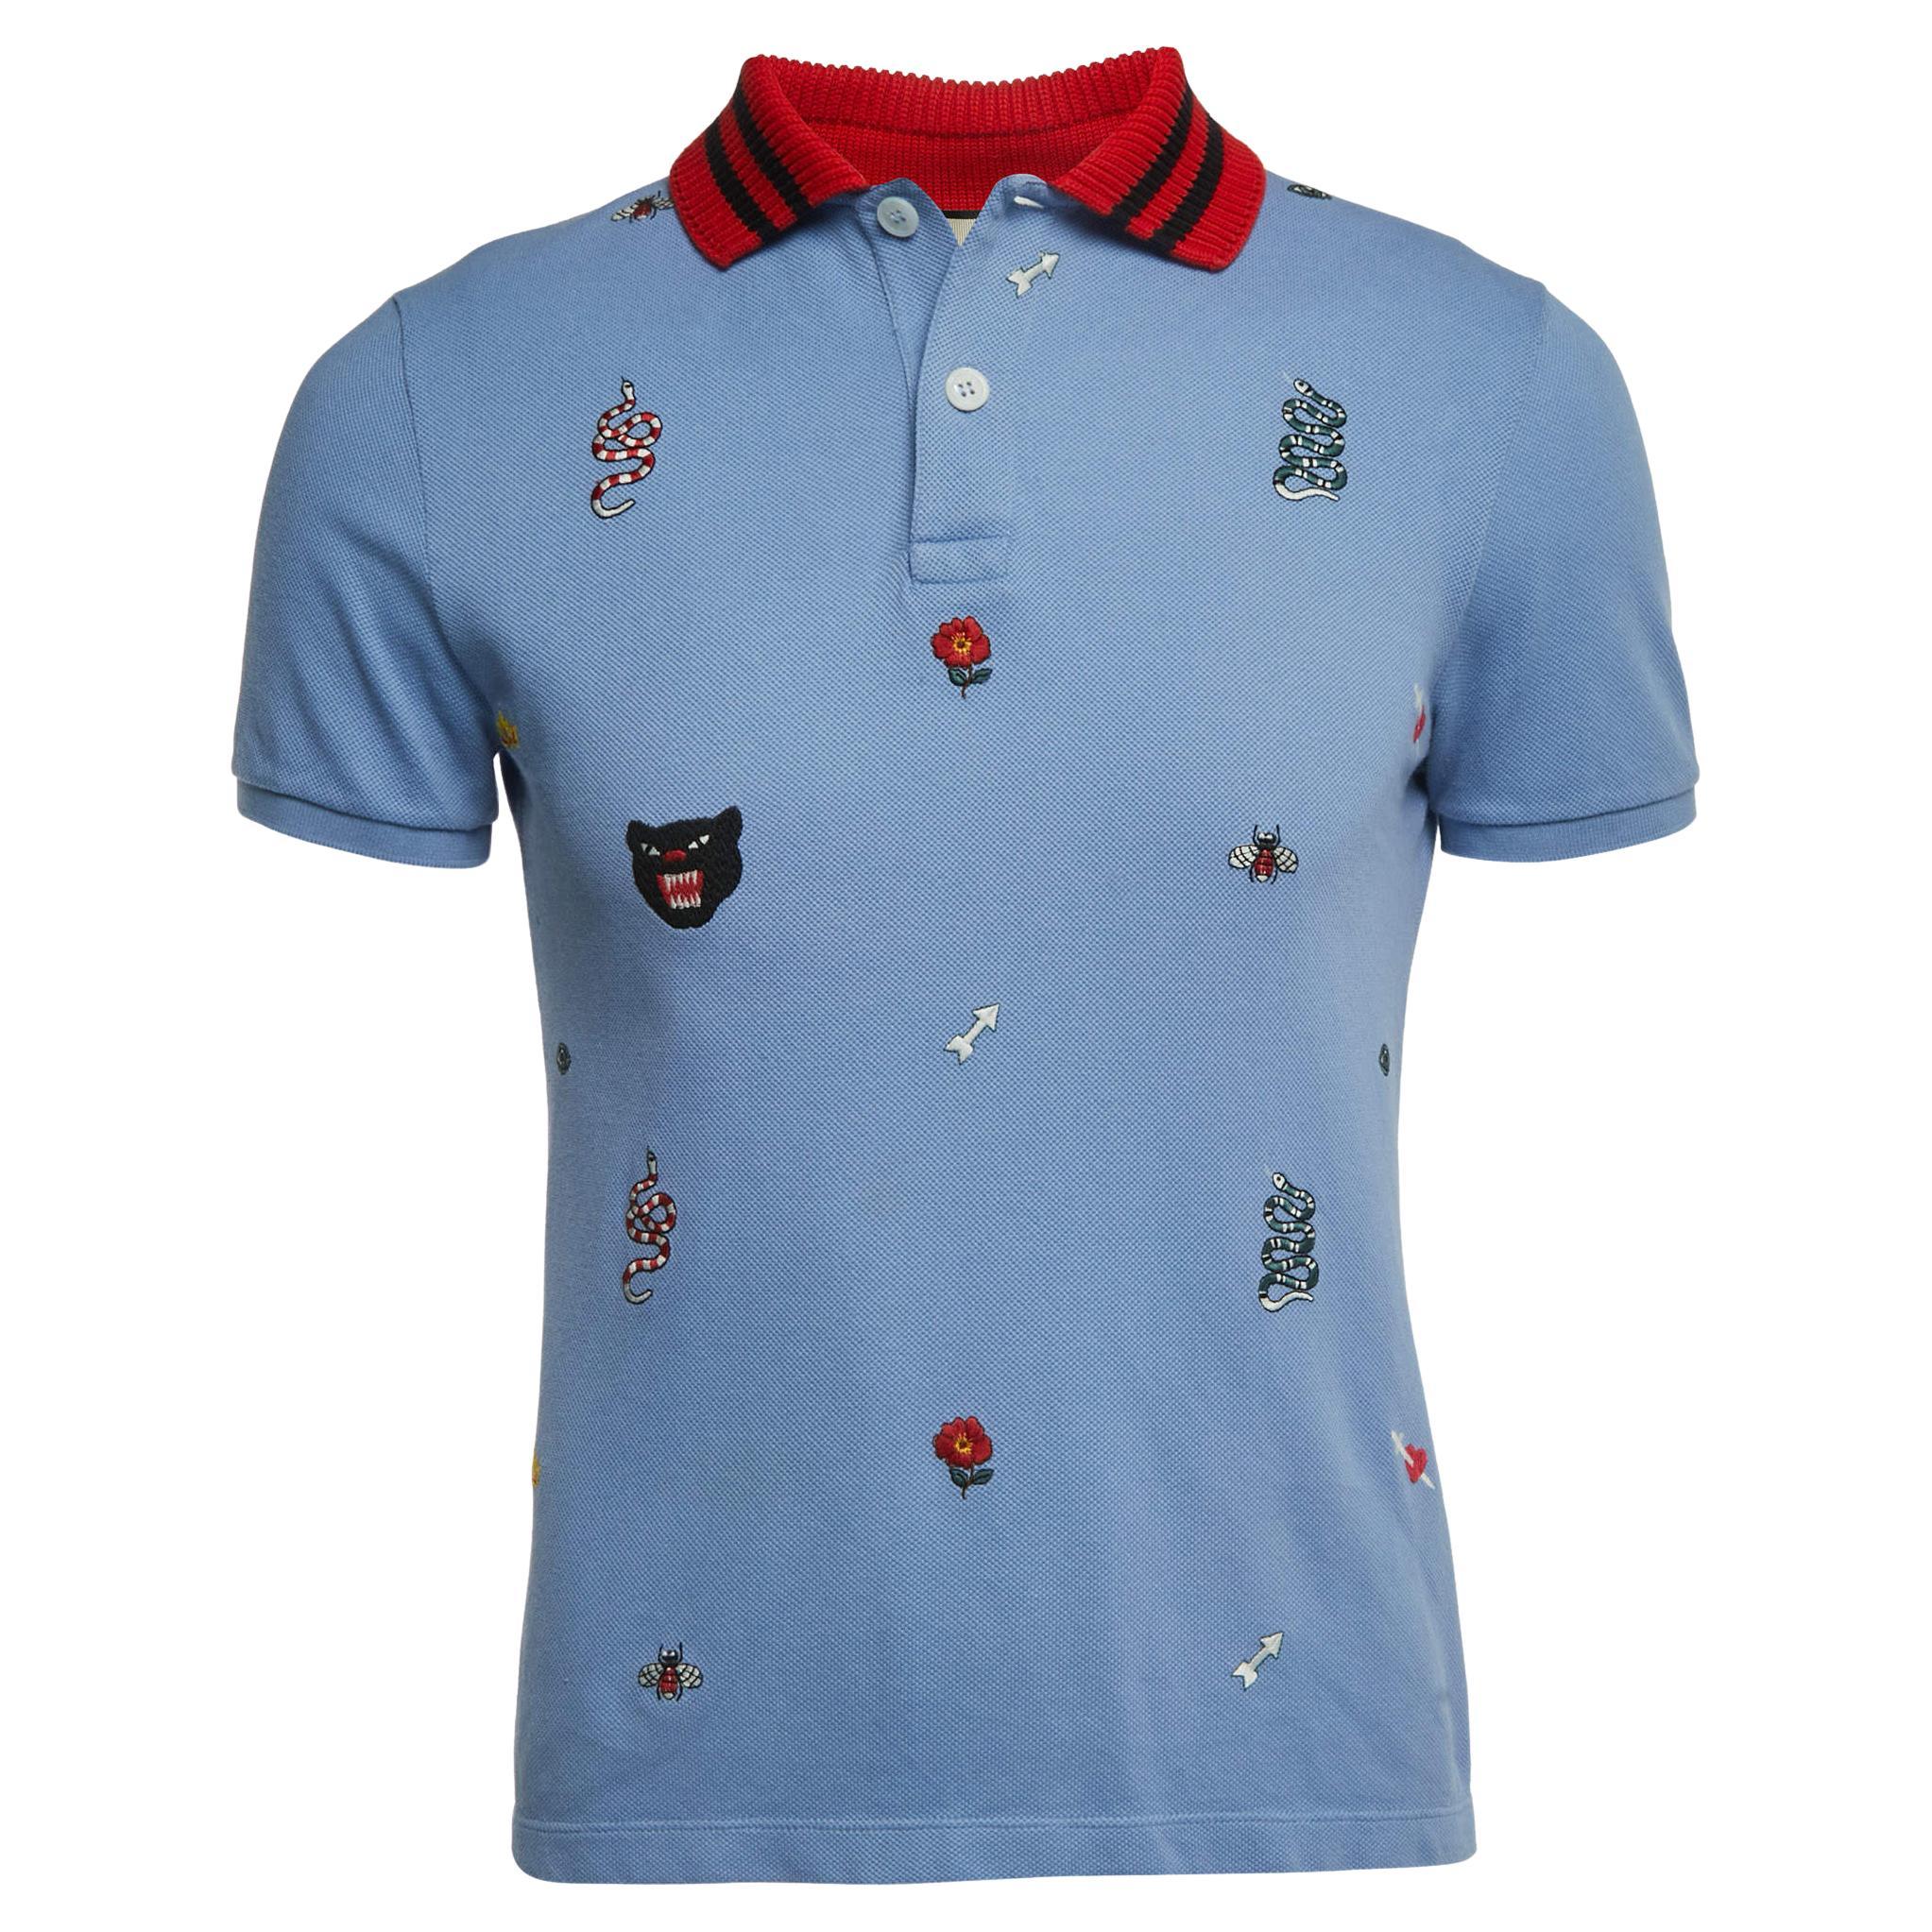 Gucci Blue Embroidered Cotton Pique Polo T-Shirt M